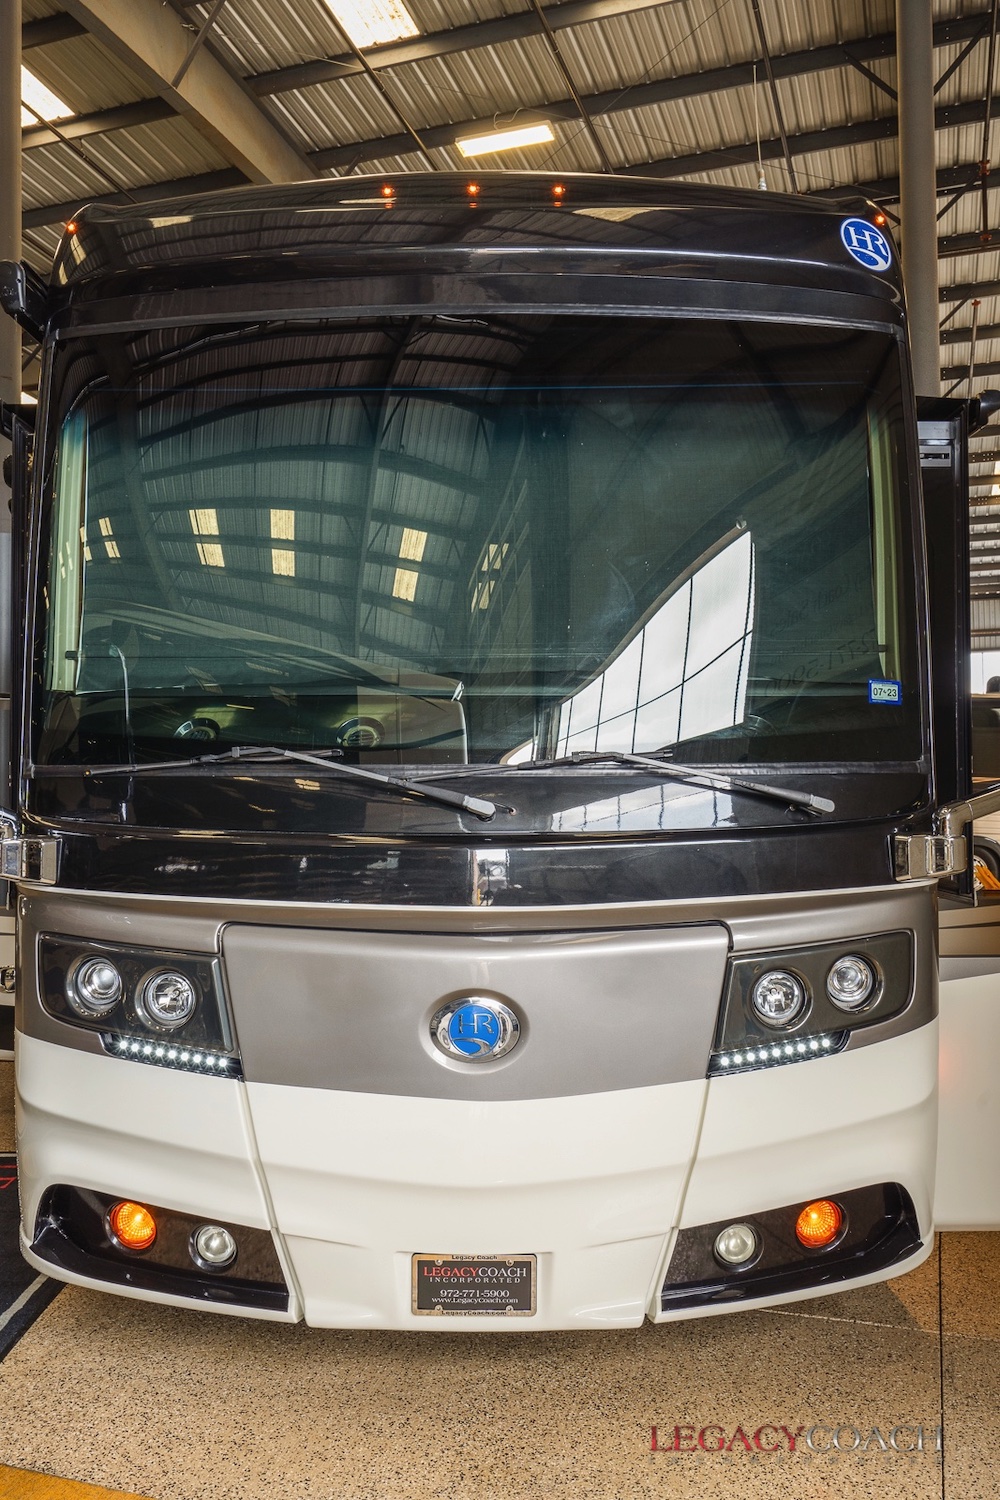 2016 Prevost Holiday Rambler For Sale